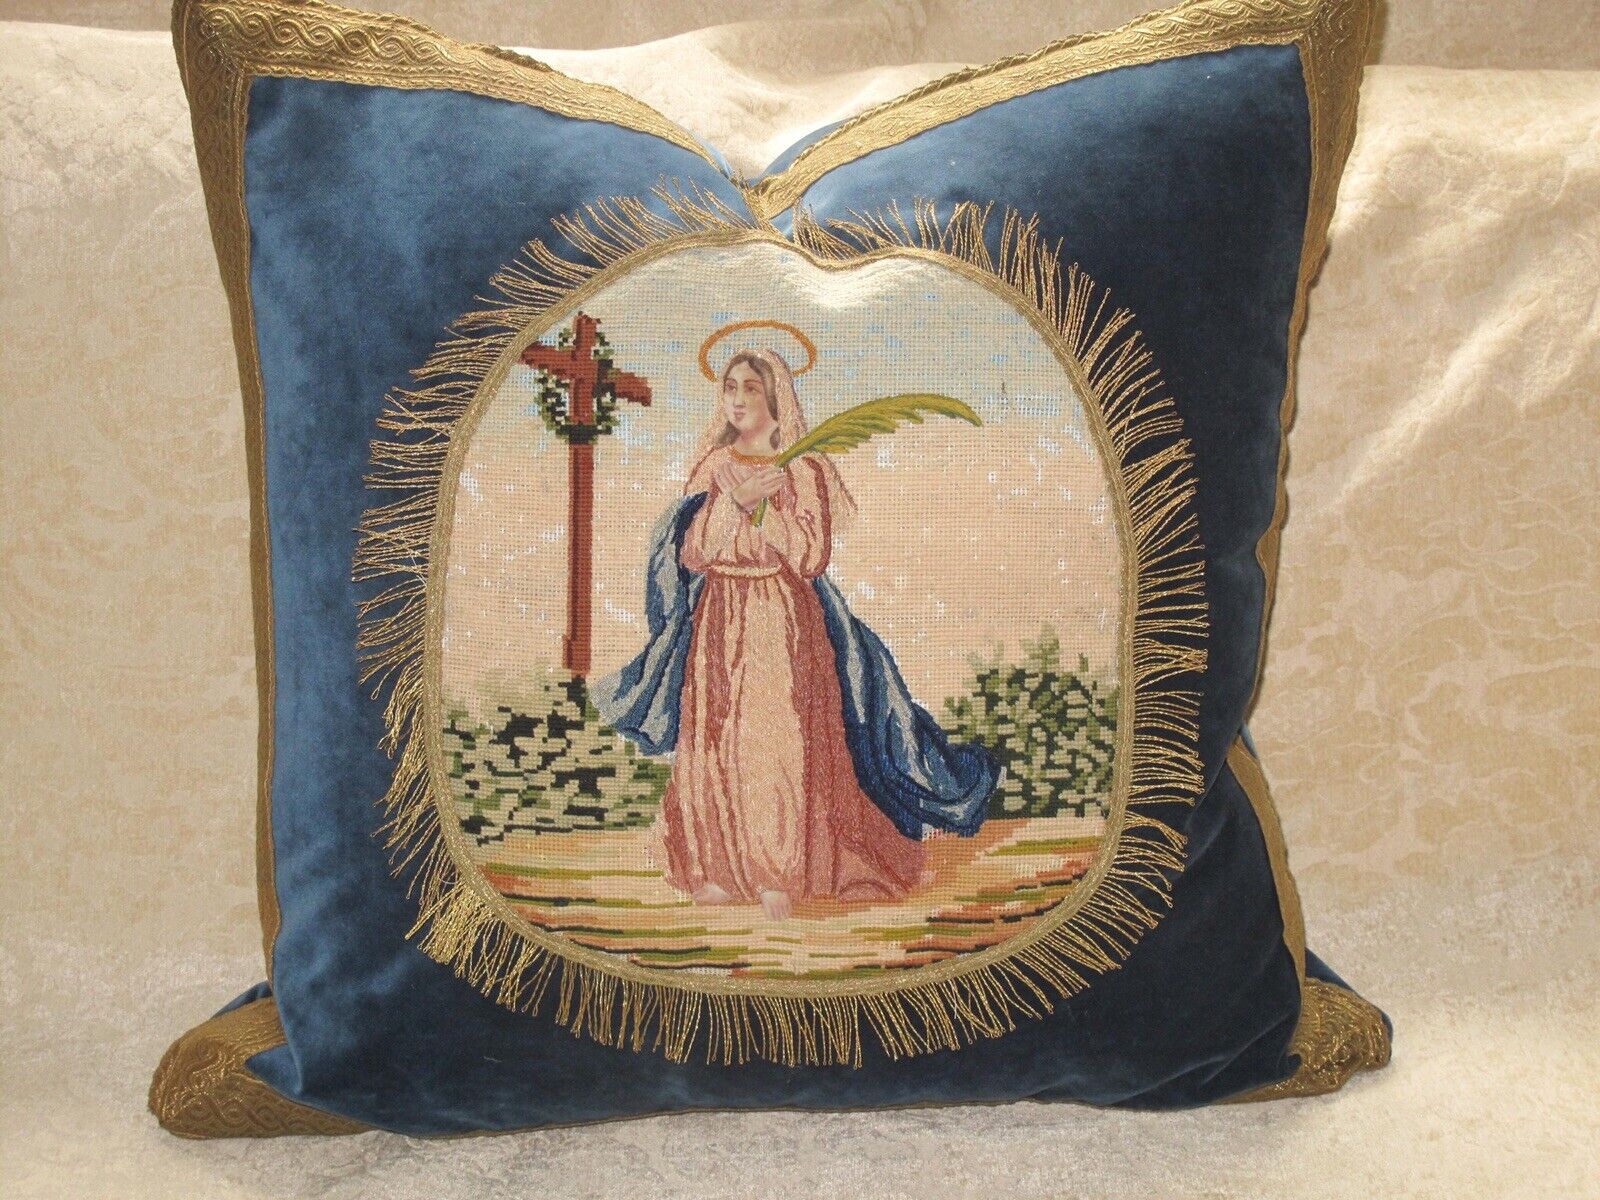 EXQUISITE FRENCH 19TH C ANTIQUE NEEDLEPOINT TAPESTRY OF SAINT WITH METALLIC TRIM